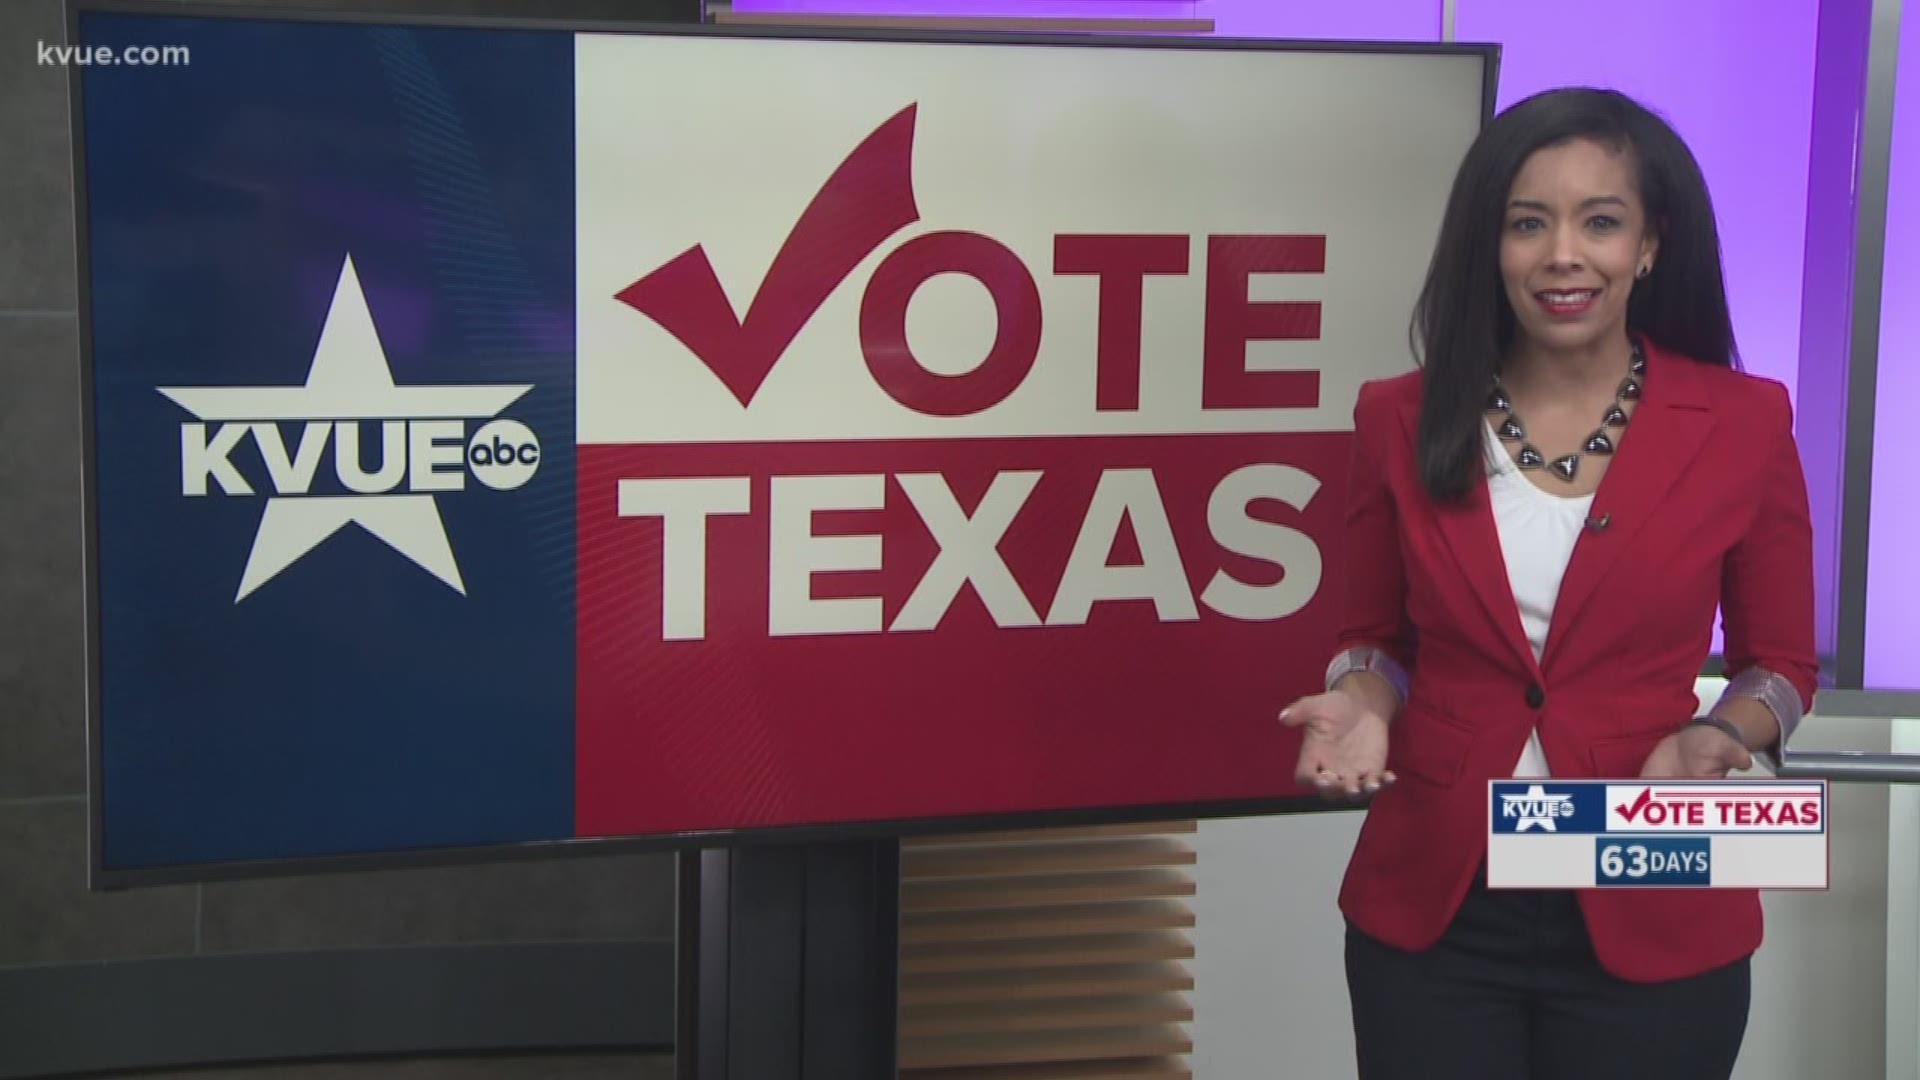 On KVUE.com/votetexas, you can find out hot to register to vote, where to vote and profiles and interviews with the 2018 candidates.